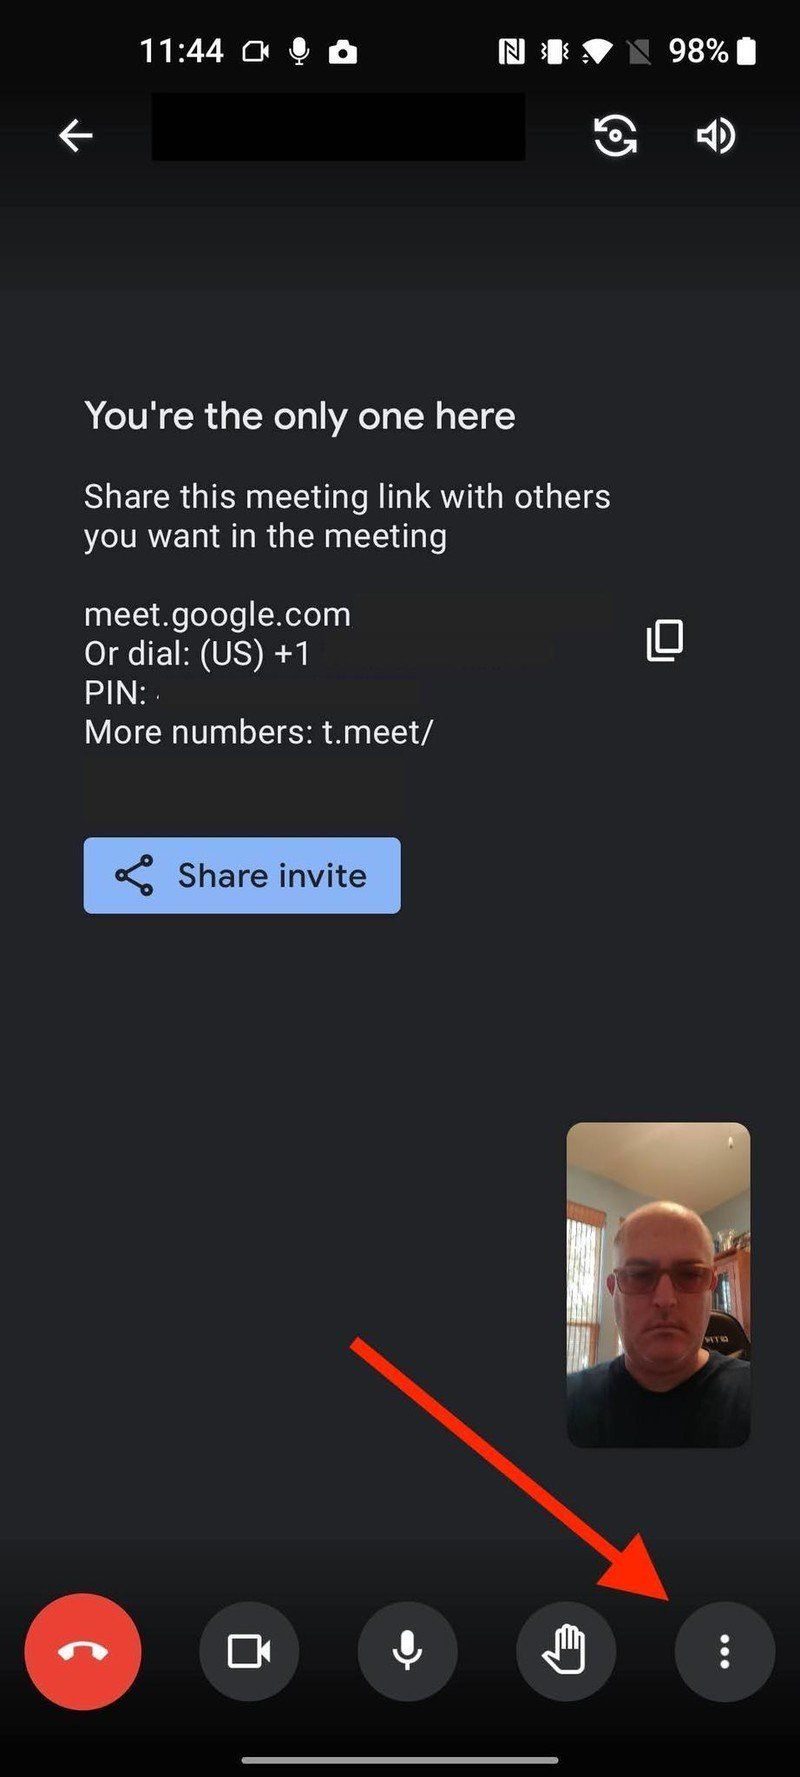 How To Share Screen On Google Meet Using Phone?